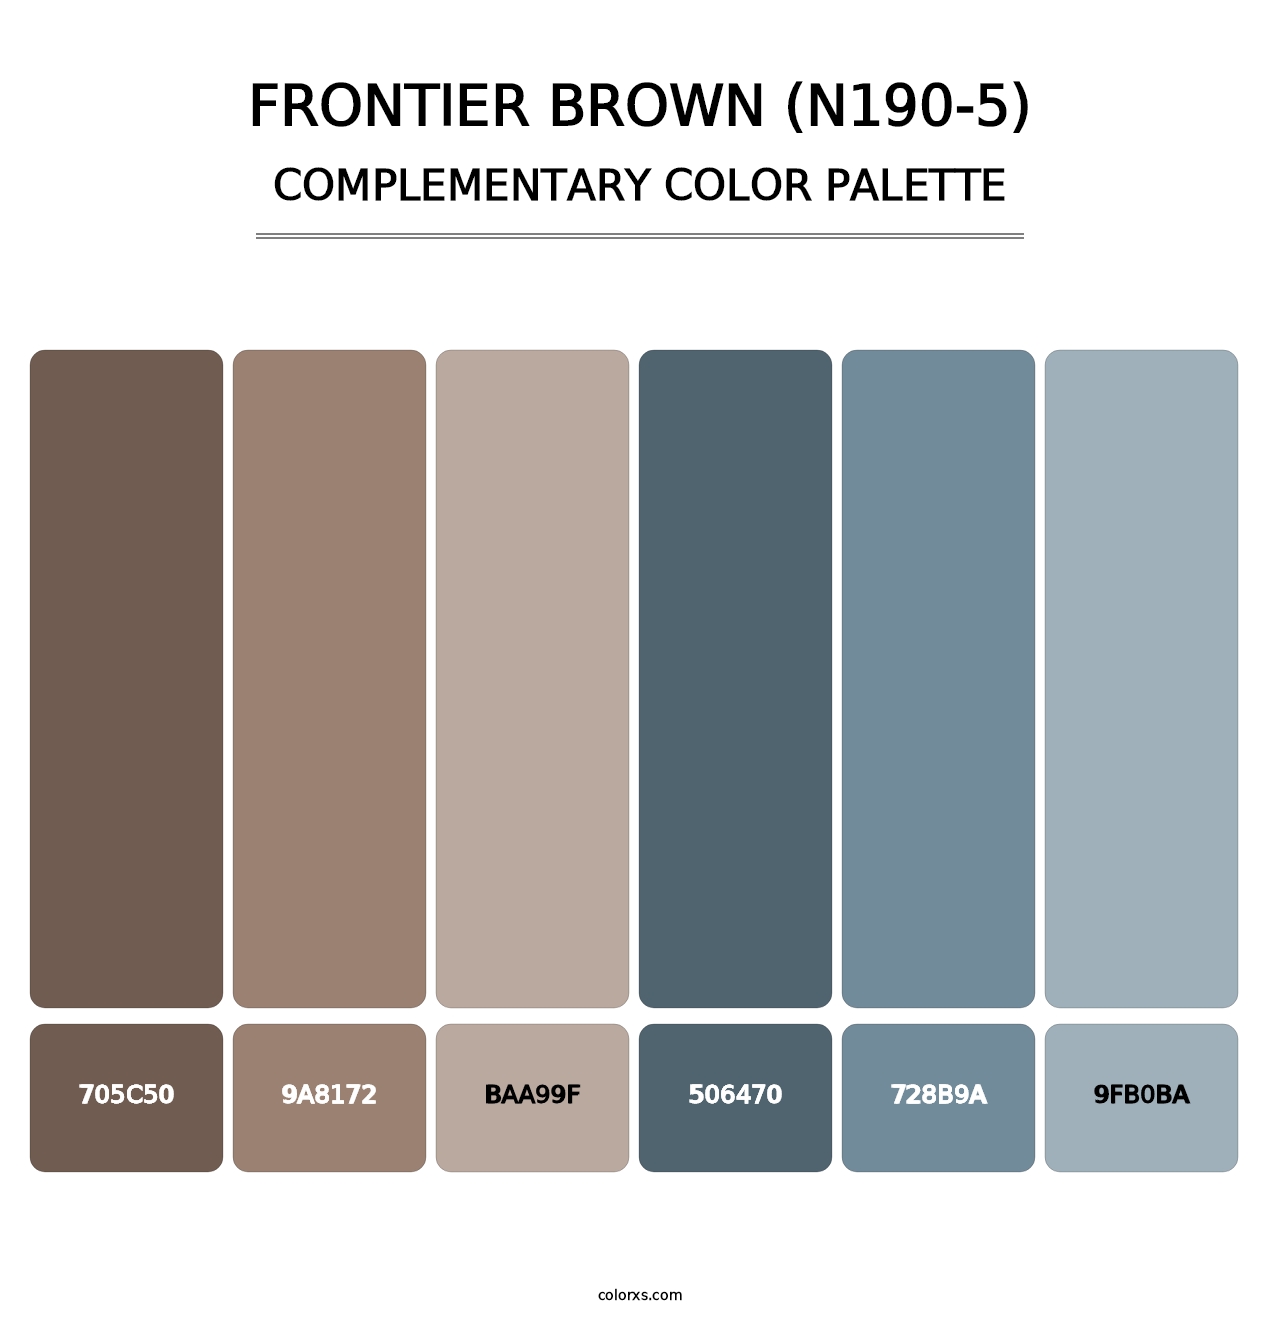 Frontier Brown (N190-5) - Complementary Color Palette